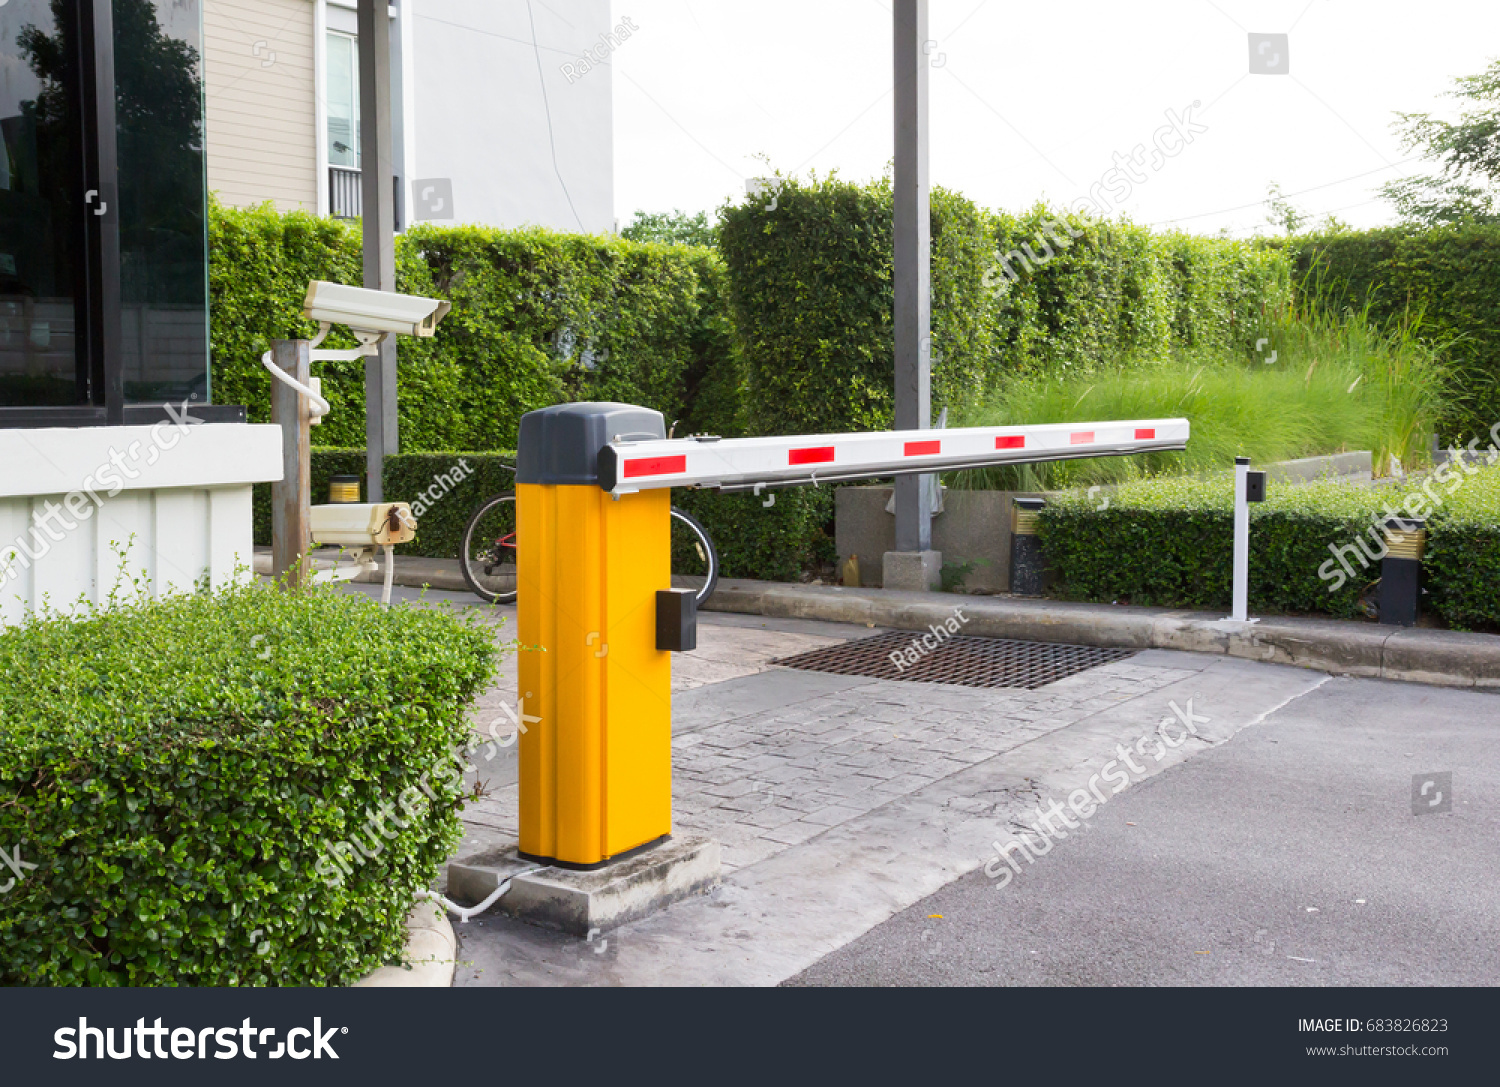 car park barrier, automatic entry system #683826823